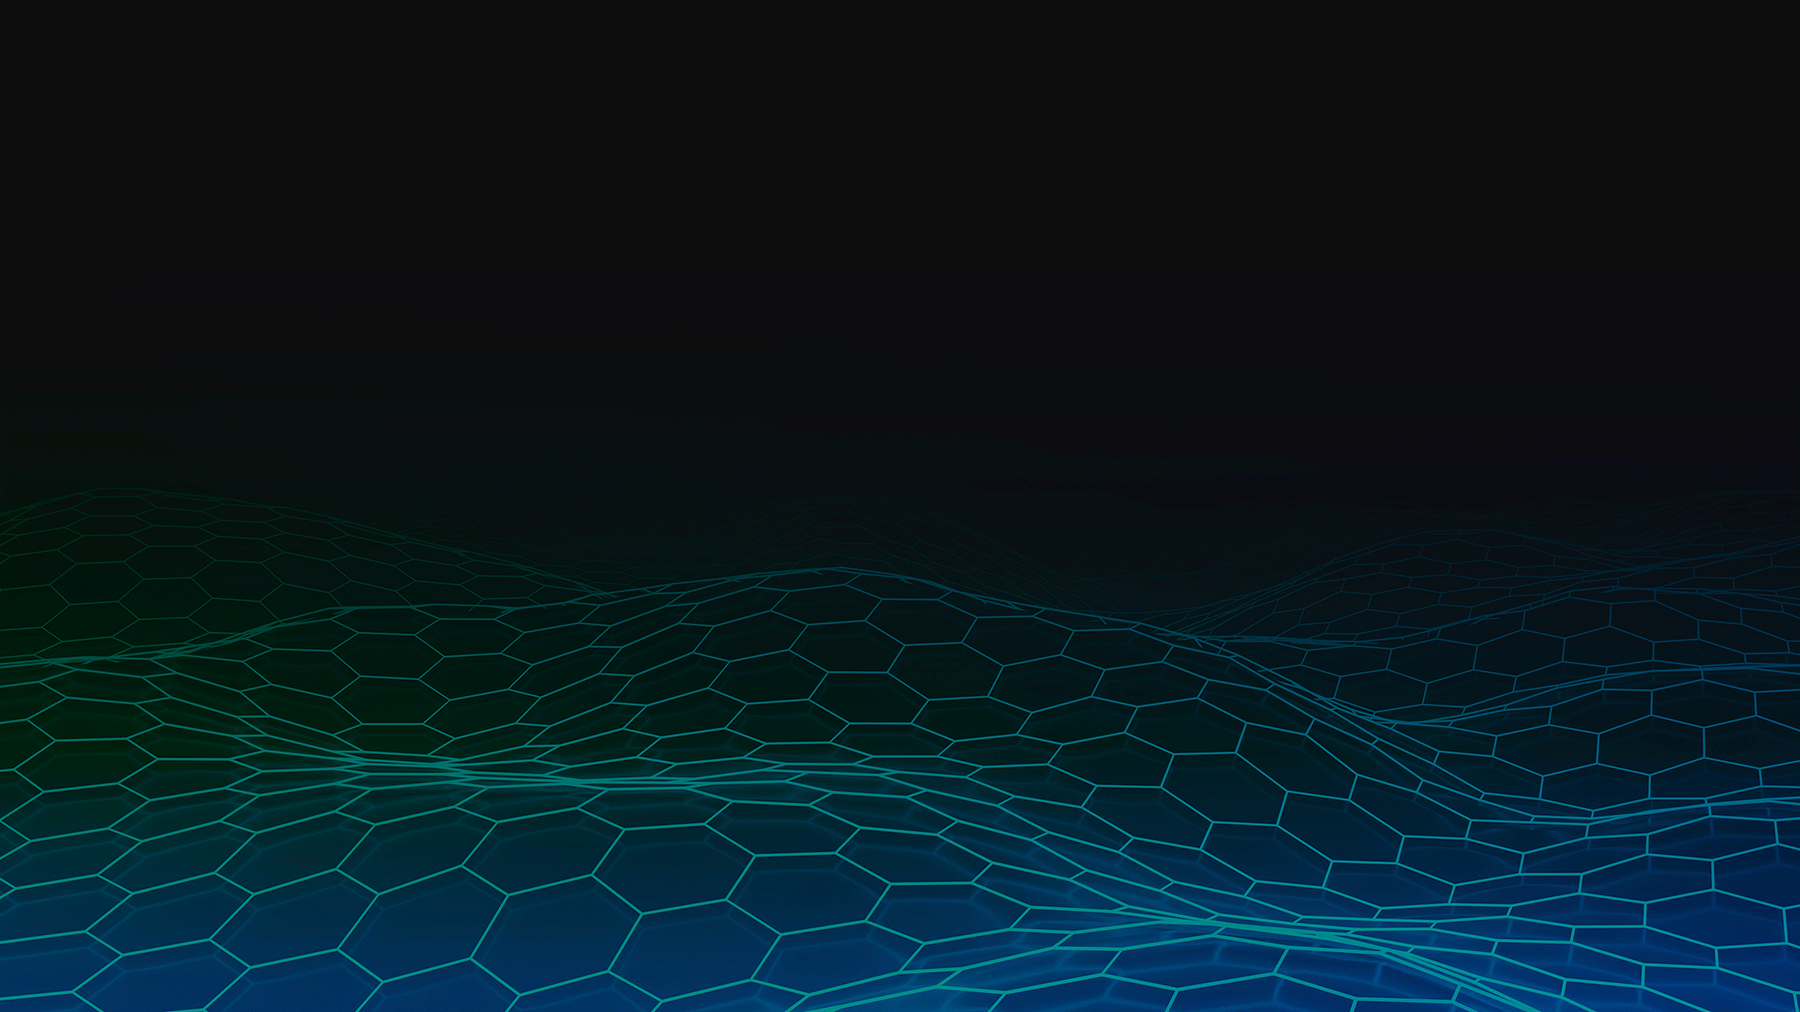 Abstract layer of hexagon outlines over dark background